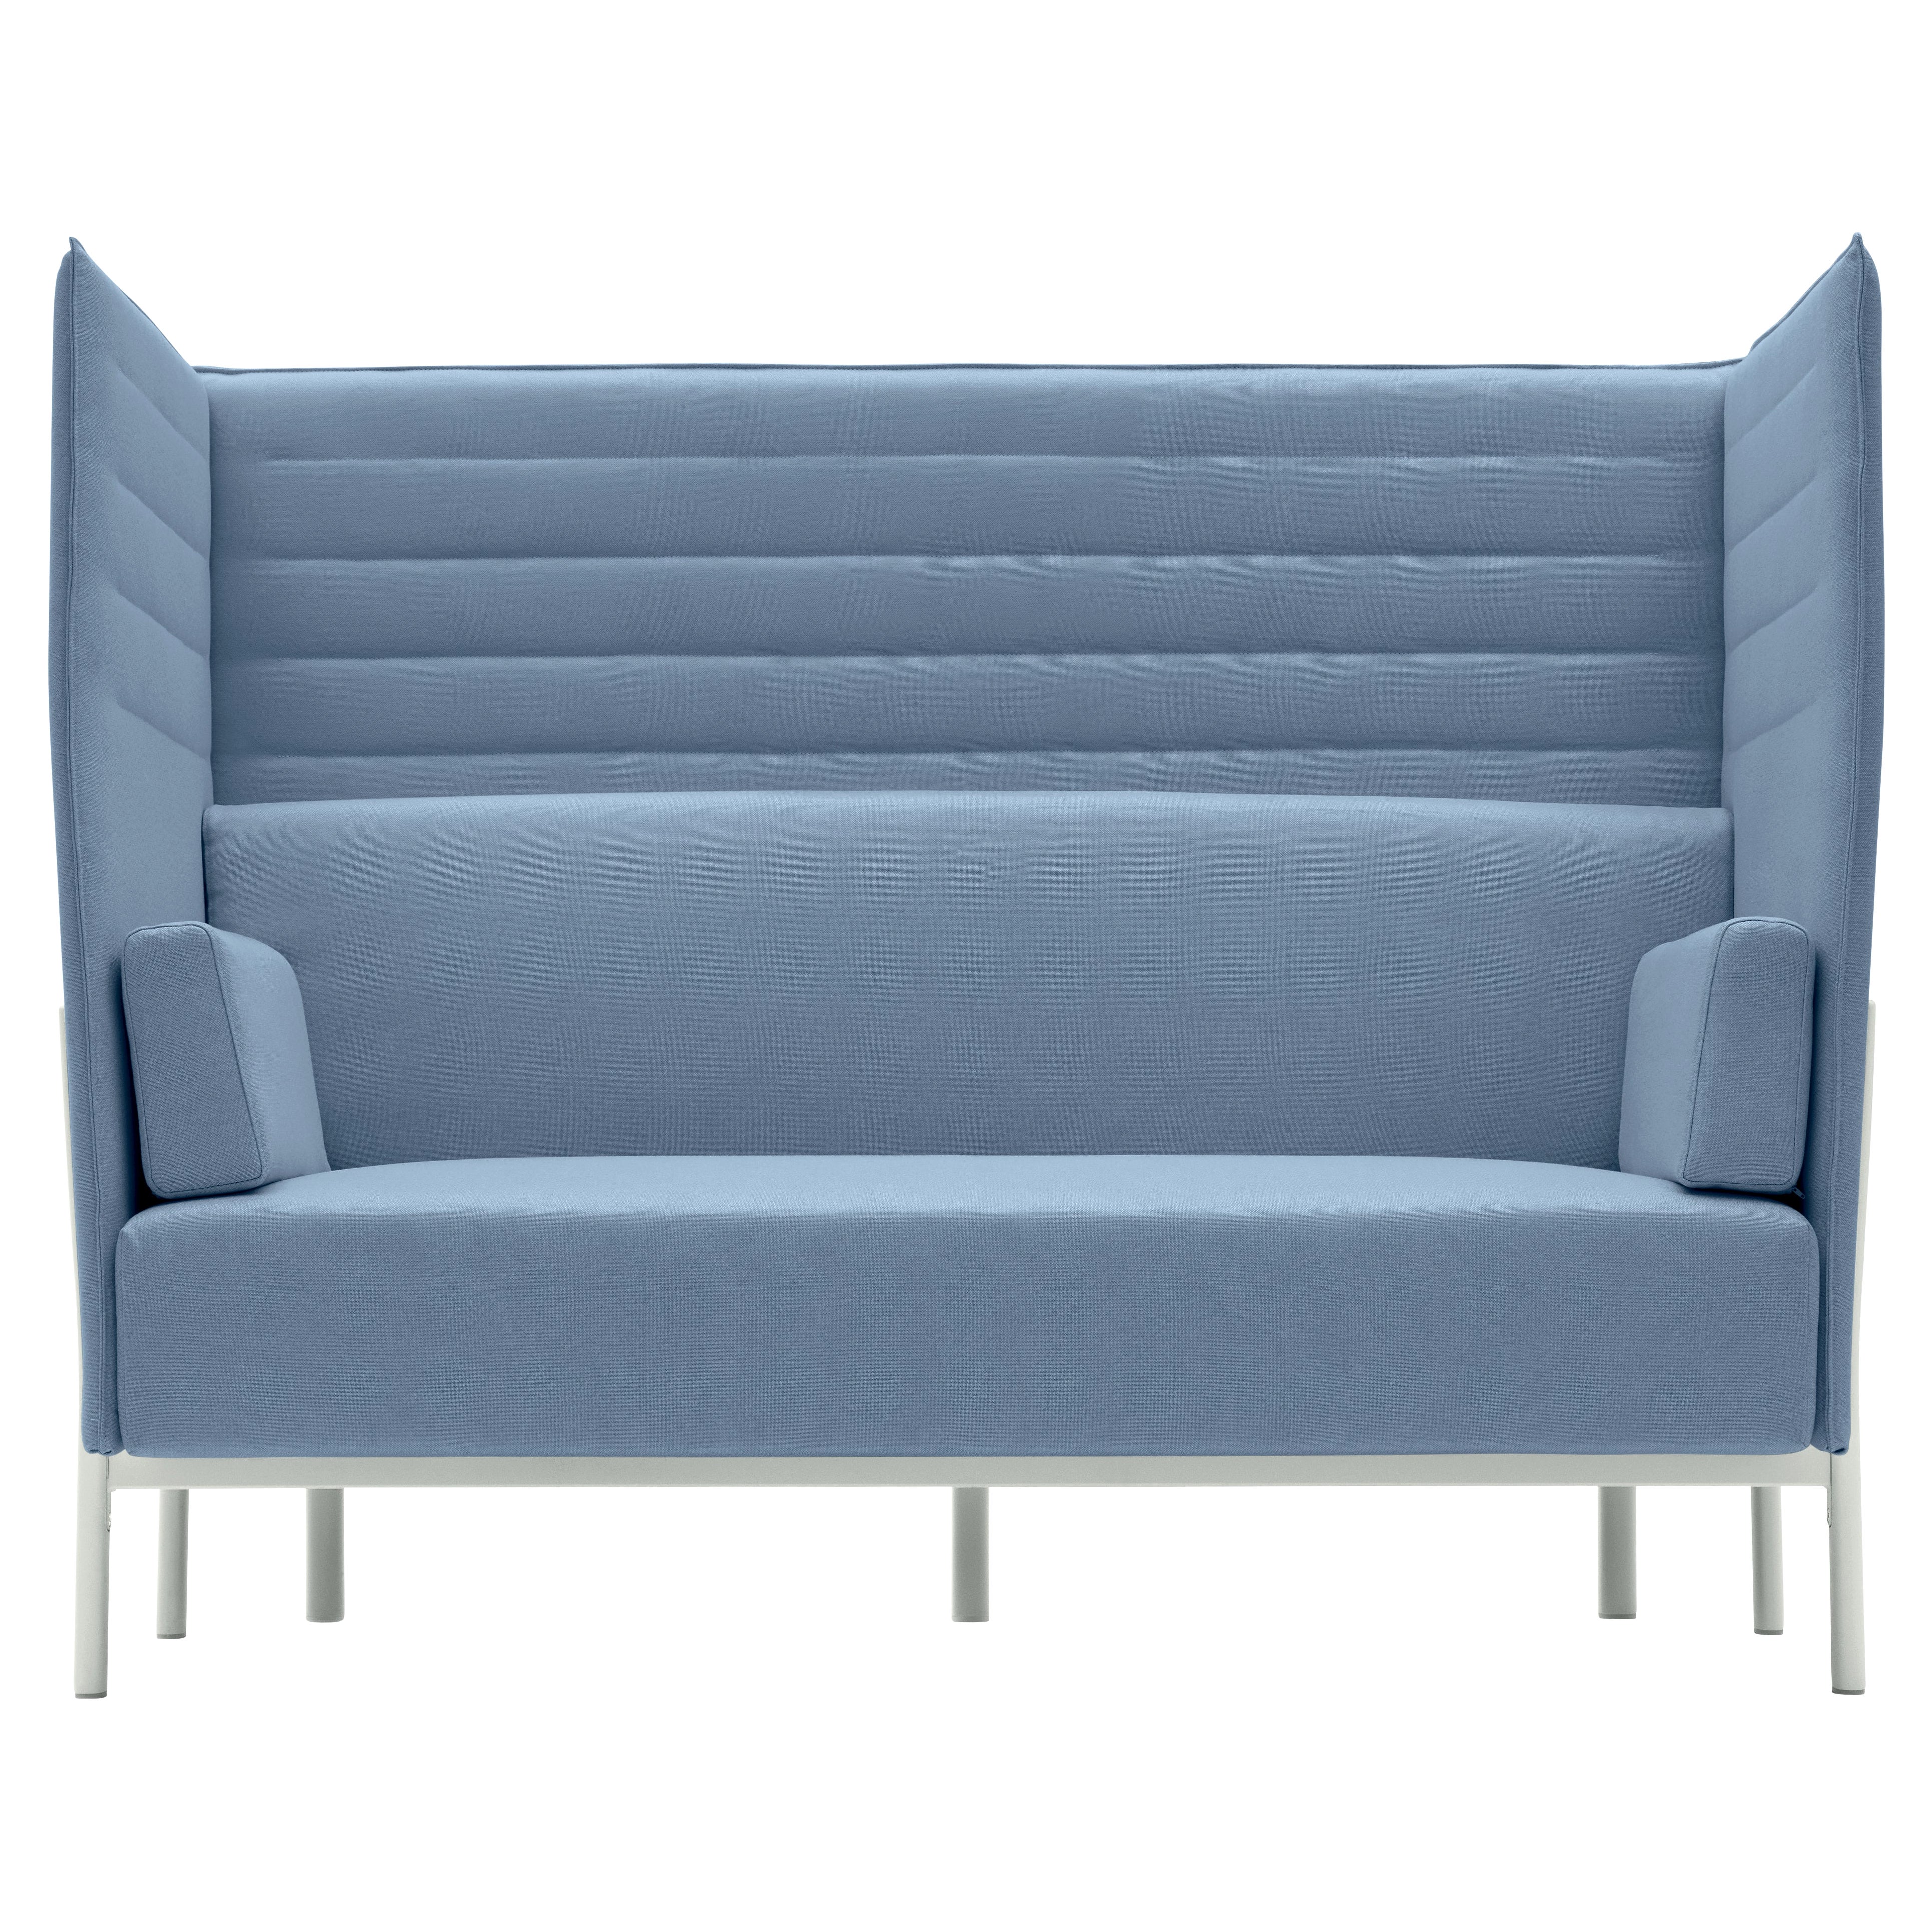 Alias 863 Eleven High Back 2 Seater Sofa in Blue &White Lacquered Aluminum Frame For Sale